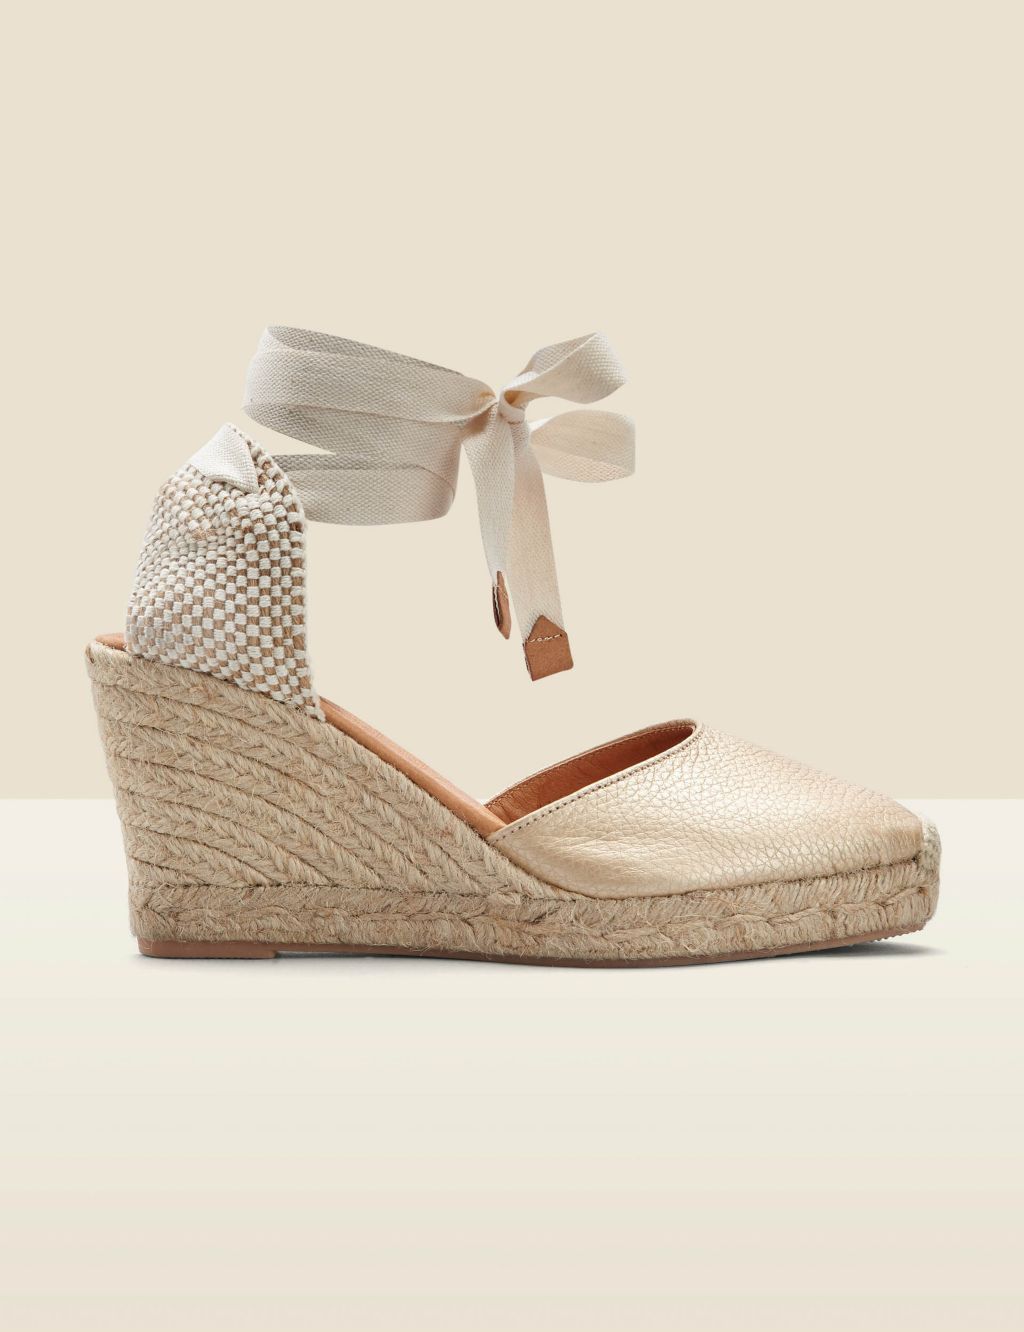 Leather Ankle Tie Wedge Espadrilles image 1